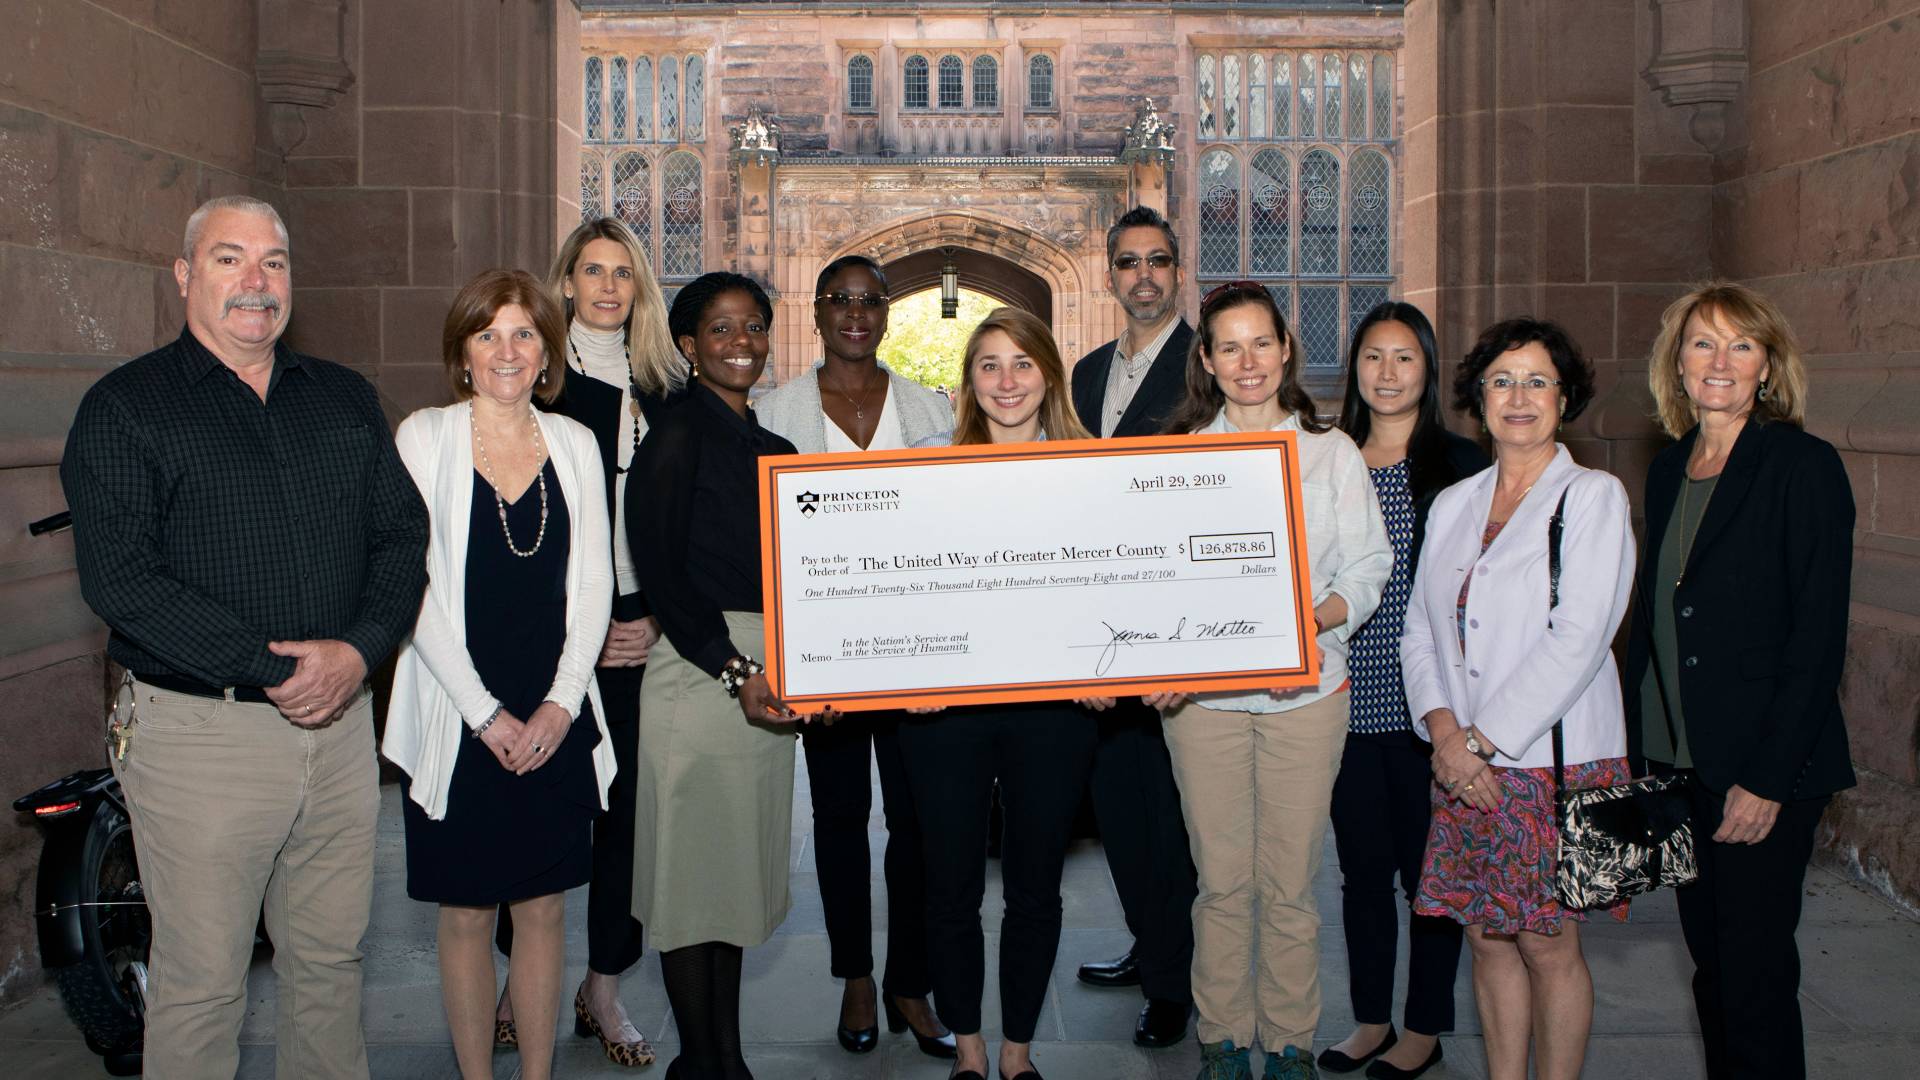 Staff members pose with a giant check from Princeton to the United Way